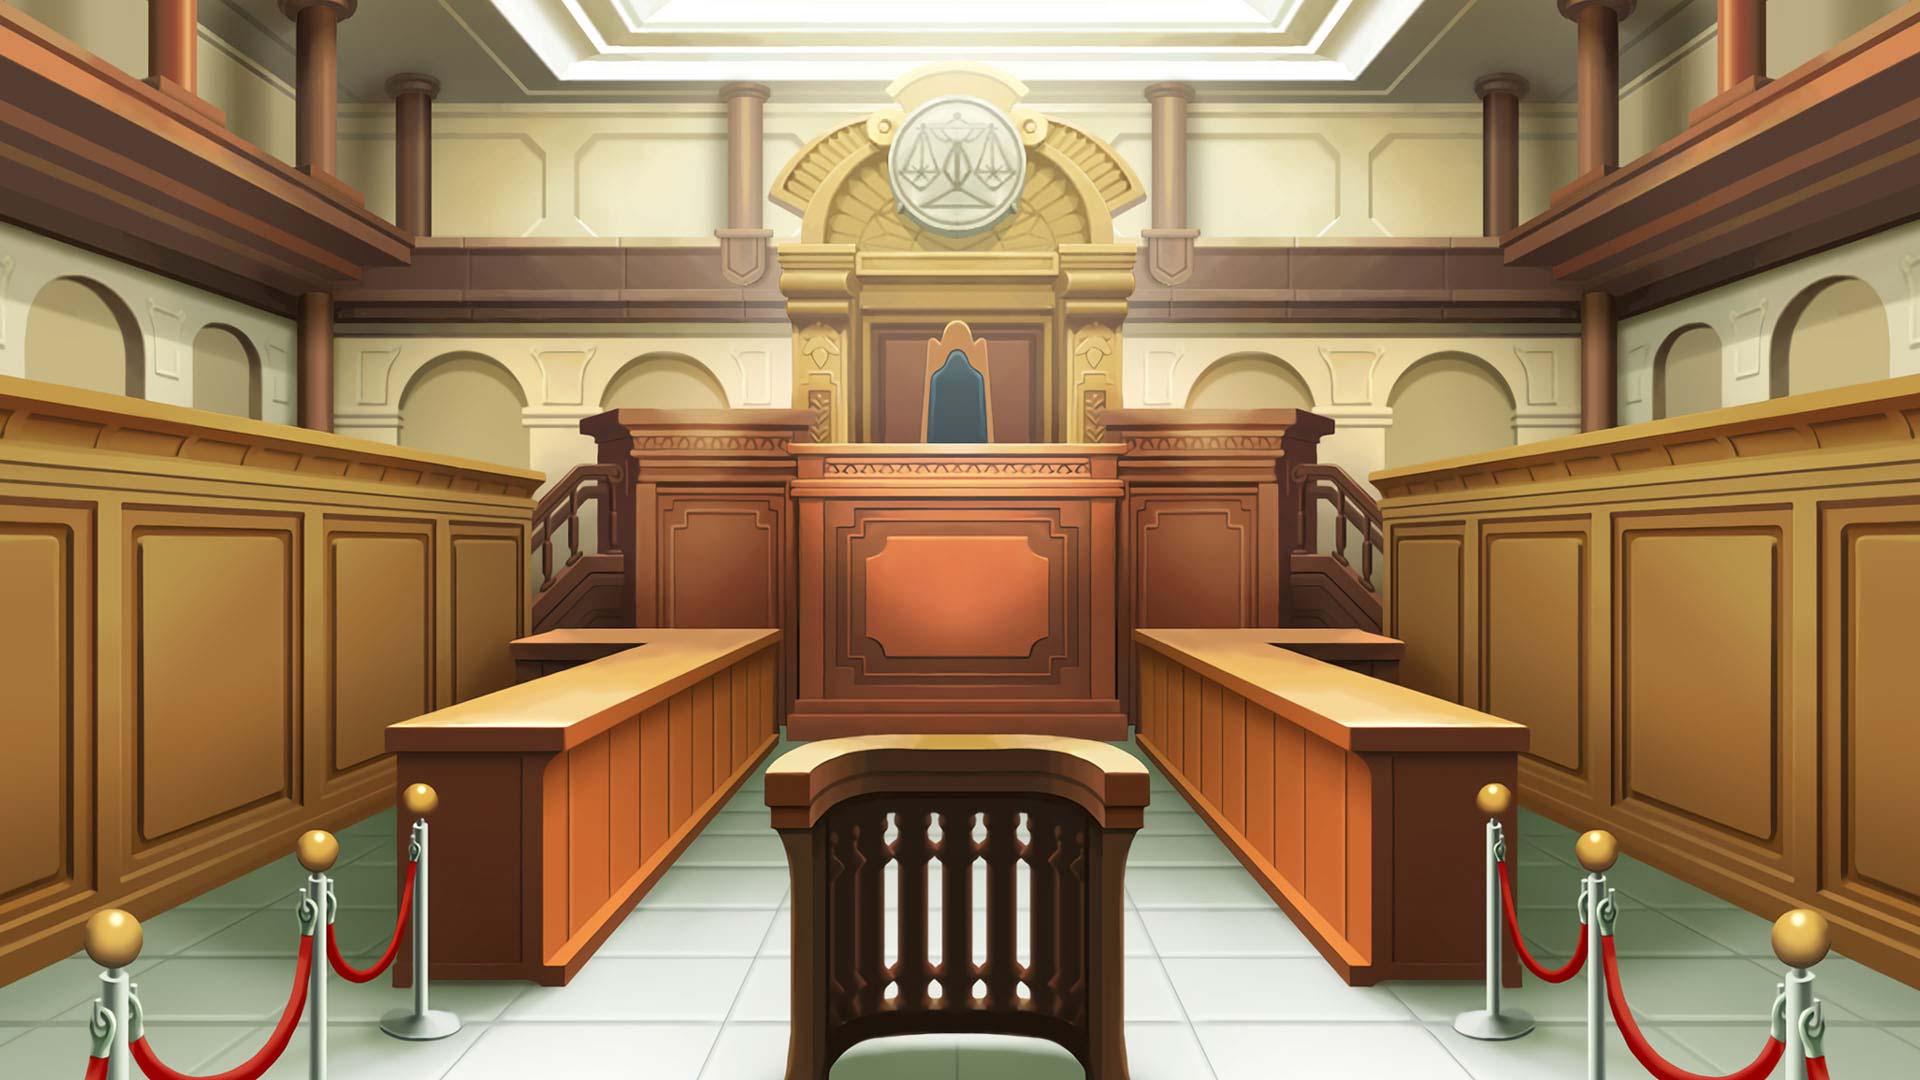 The case was by the court. Судебный зал Ace attorney. Суд Ace attorney фон. Ace attorney courtroom. Зал суда Эйс атторни.